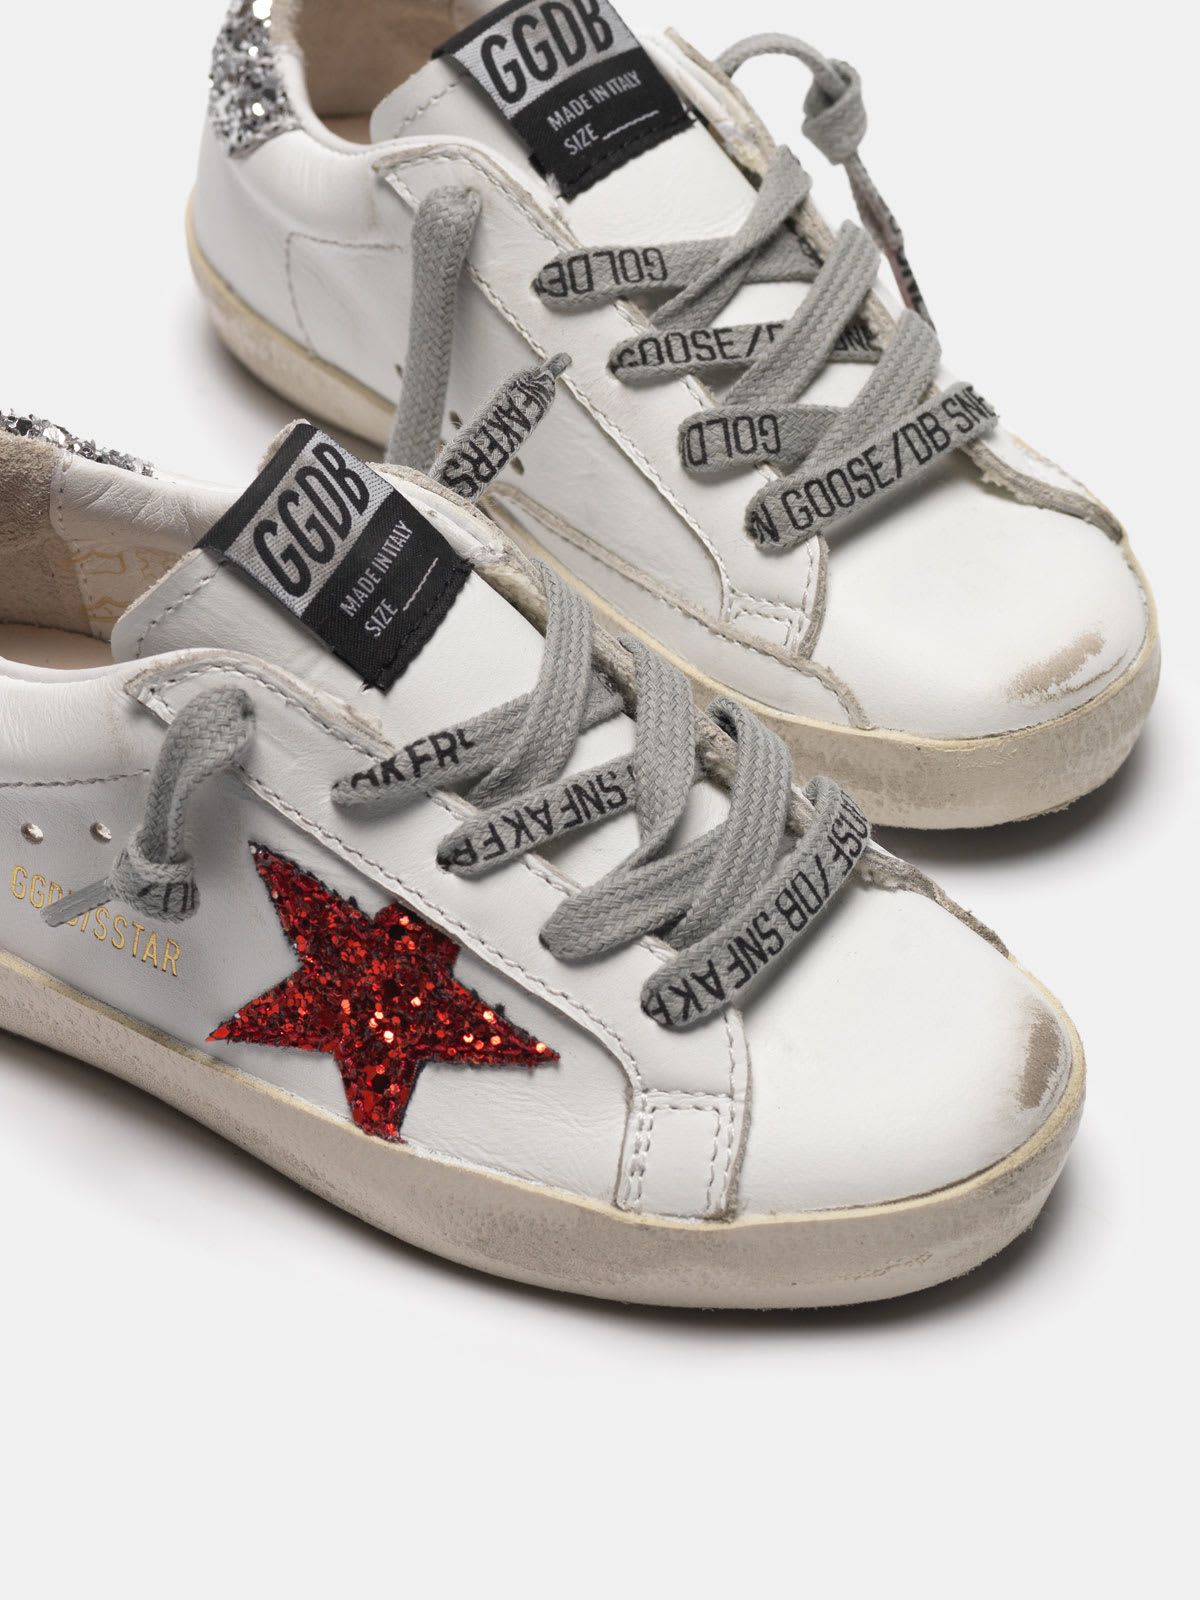 Superstar sneakers with glittery red star and glittery silver heel tab